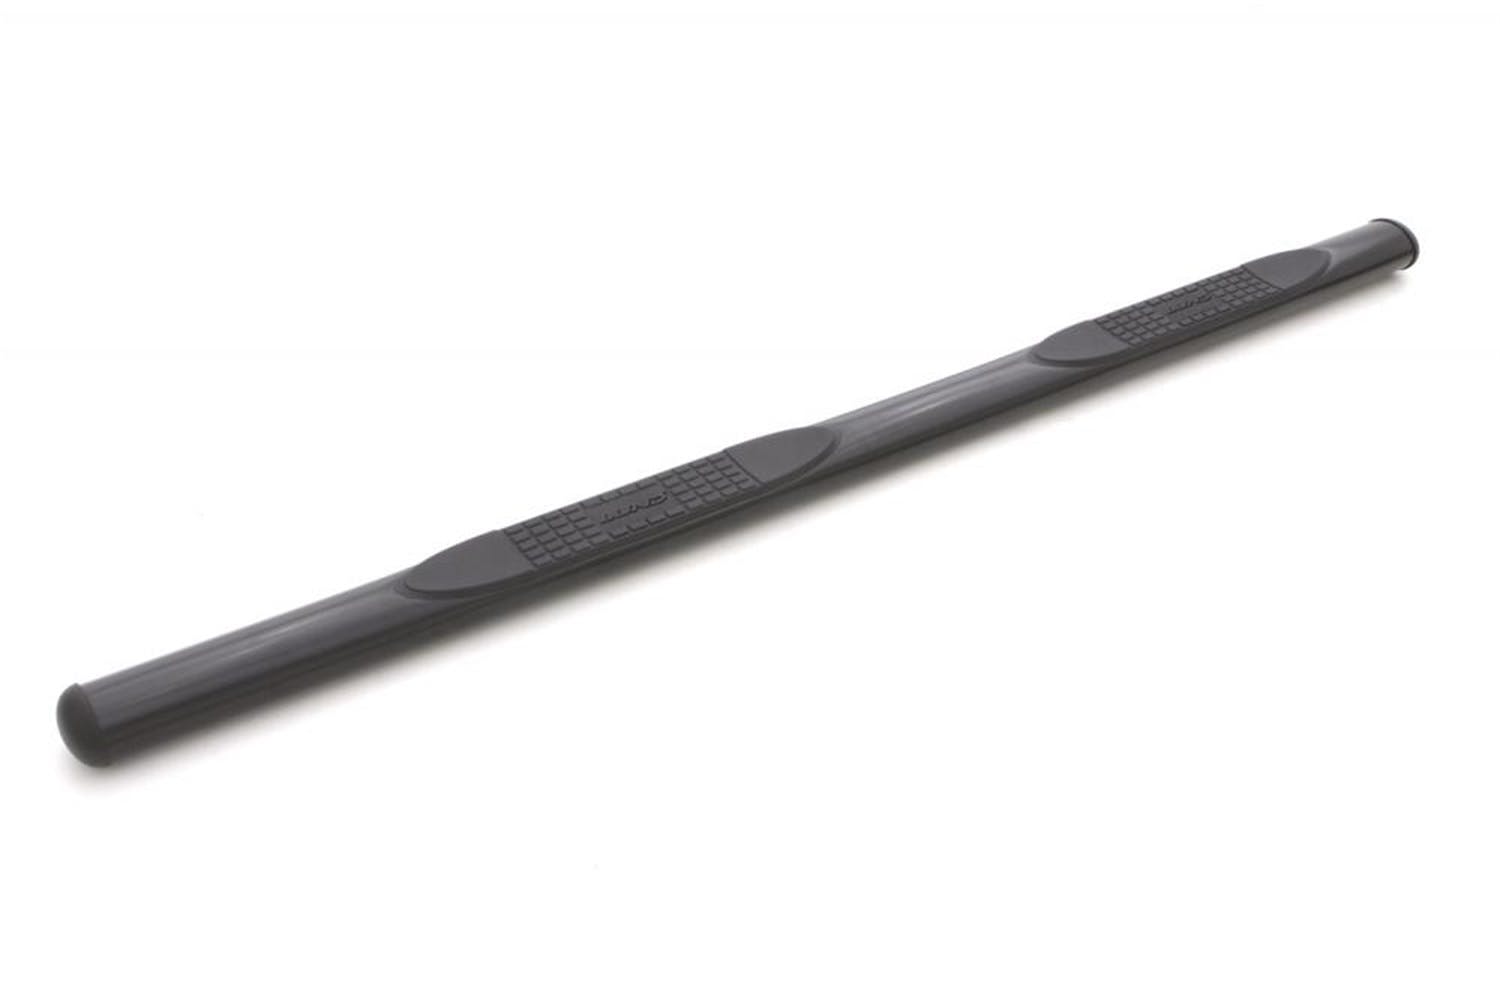 LUND 23689173 4 Inch Oval Straight Nerf Bar - Black 4 In OVAL STRAIGHT STEEL